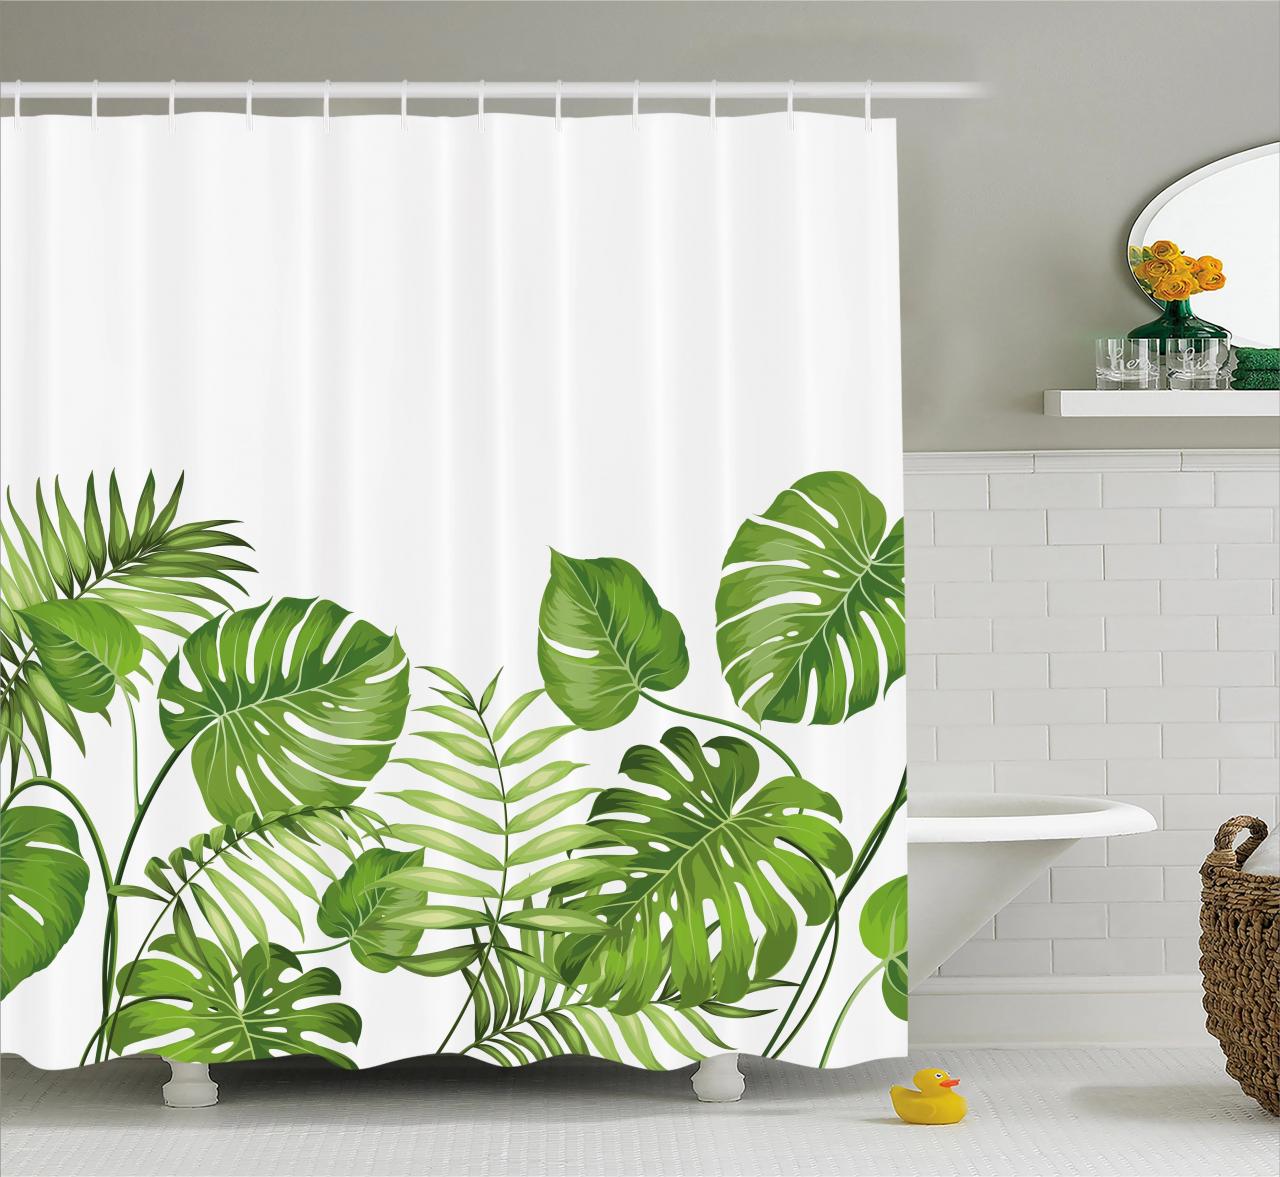 Leaf Shower Curtain, Nature Jungle Forest Rainforest Inspired Leaves